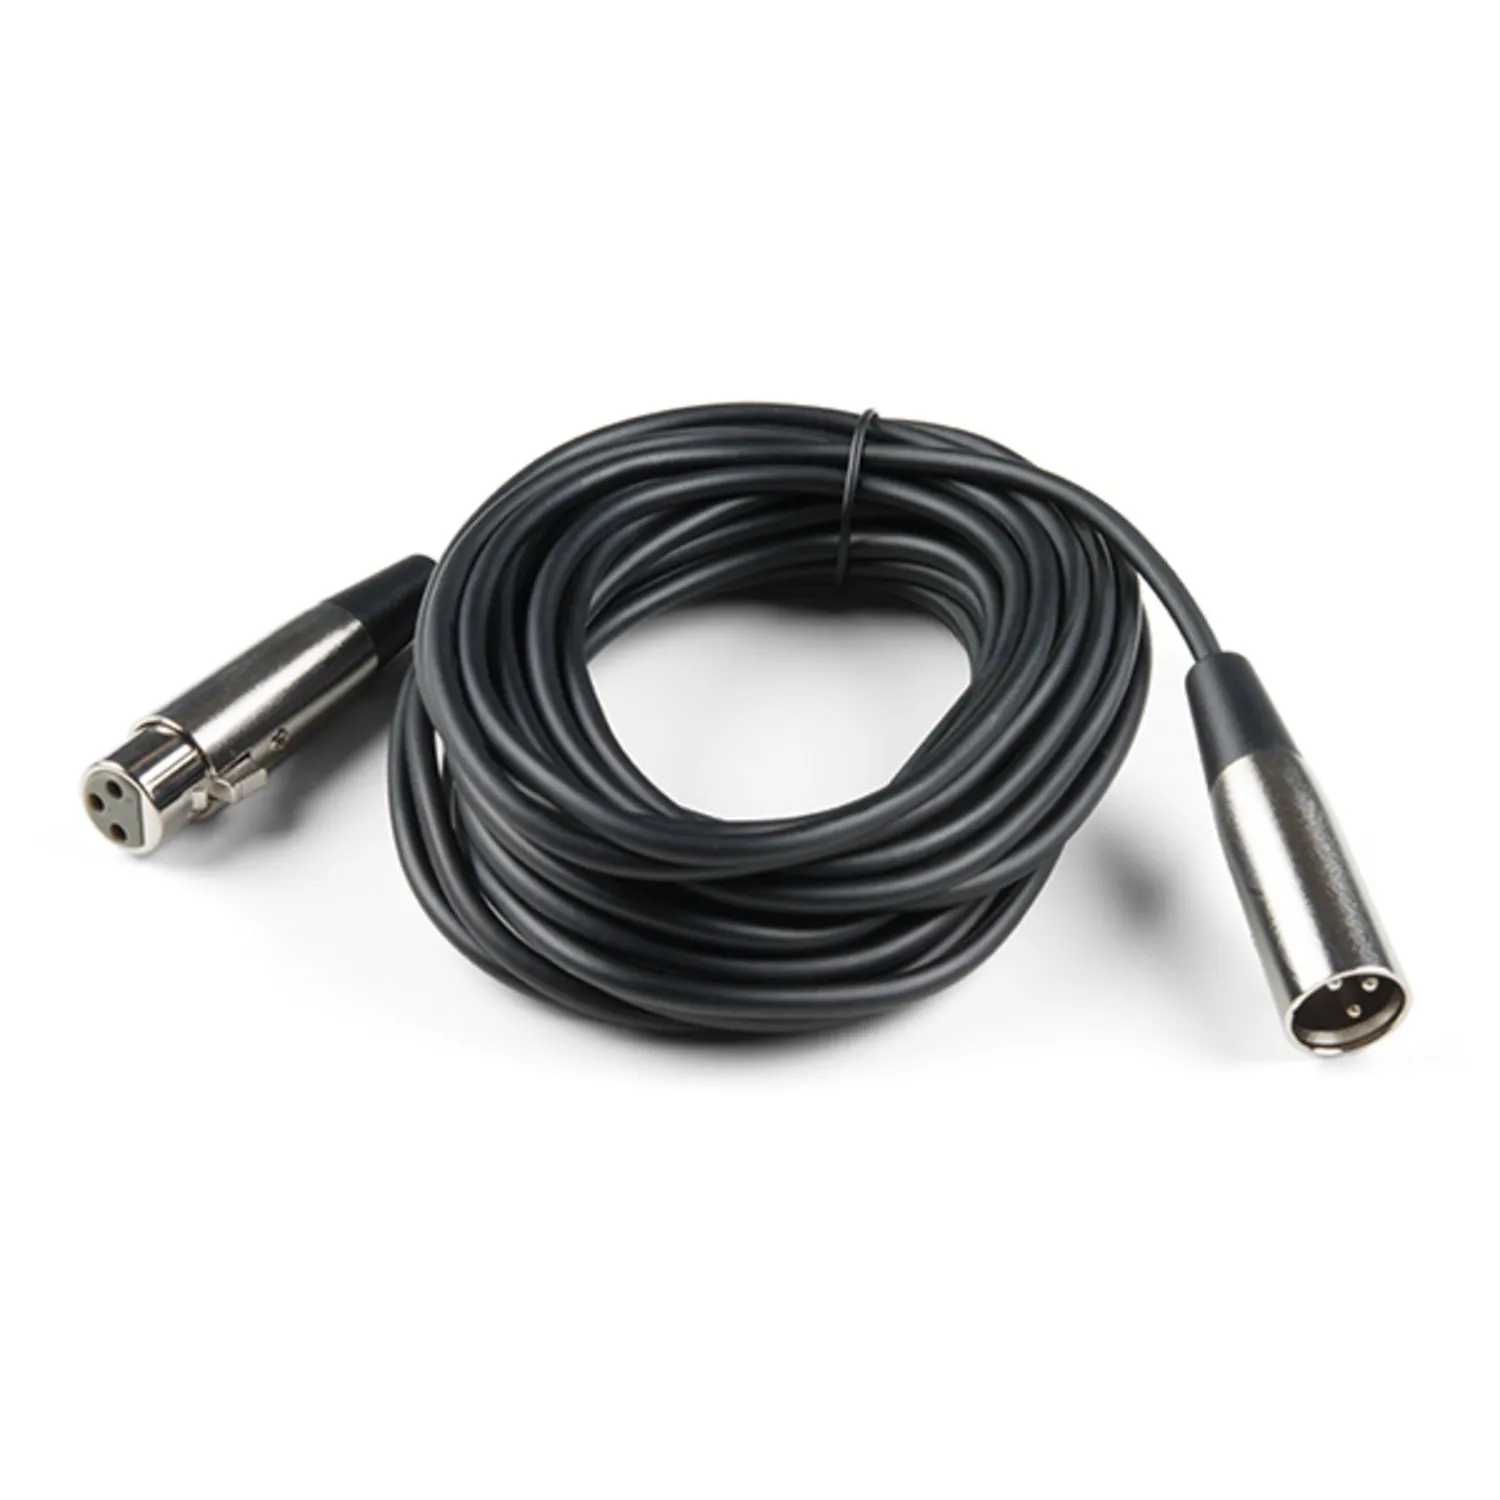 Photo of XLR-3 Cable - 25ft